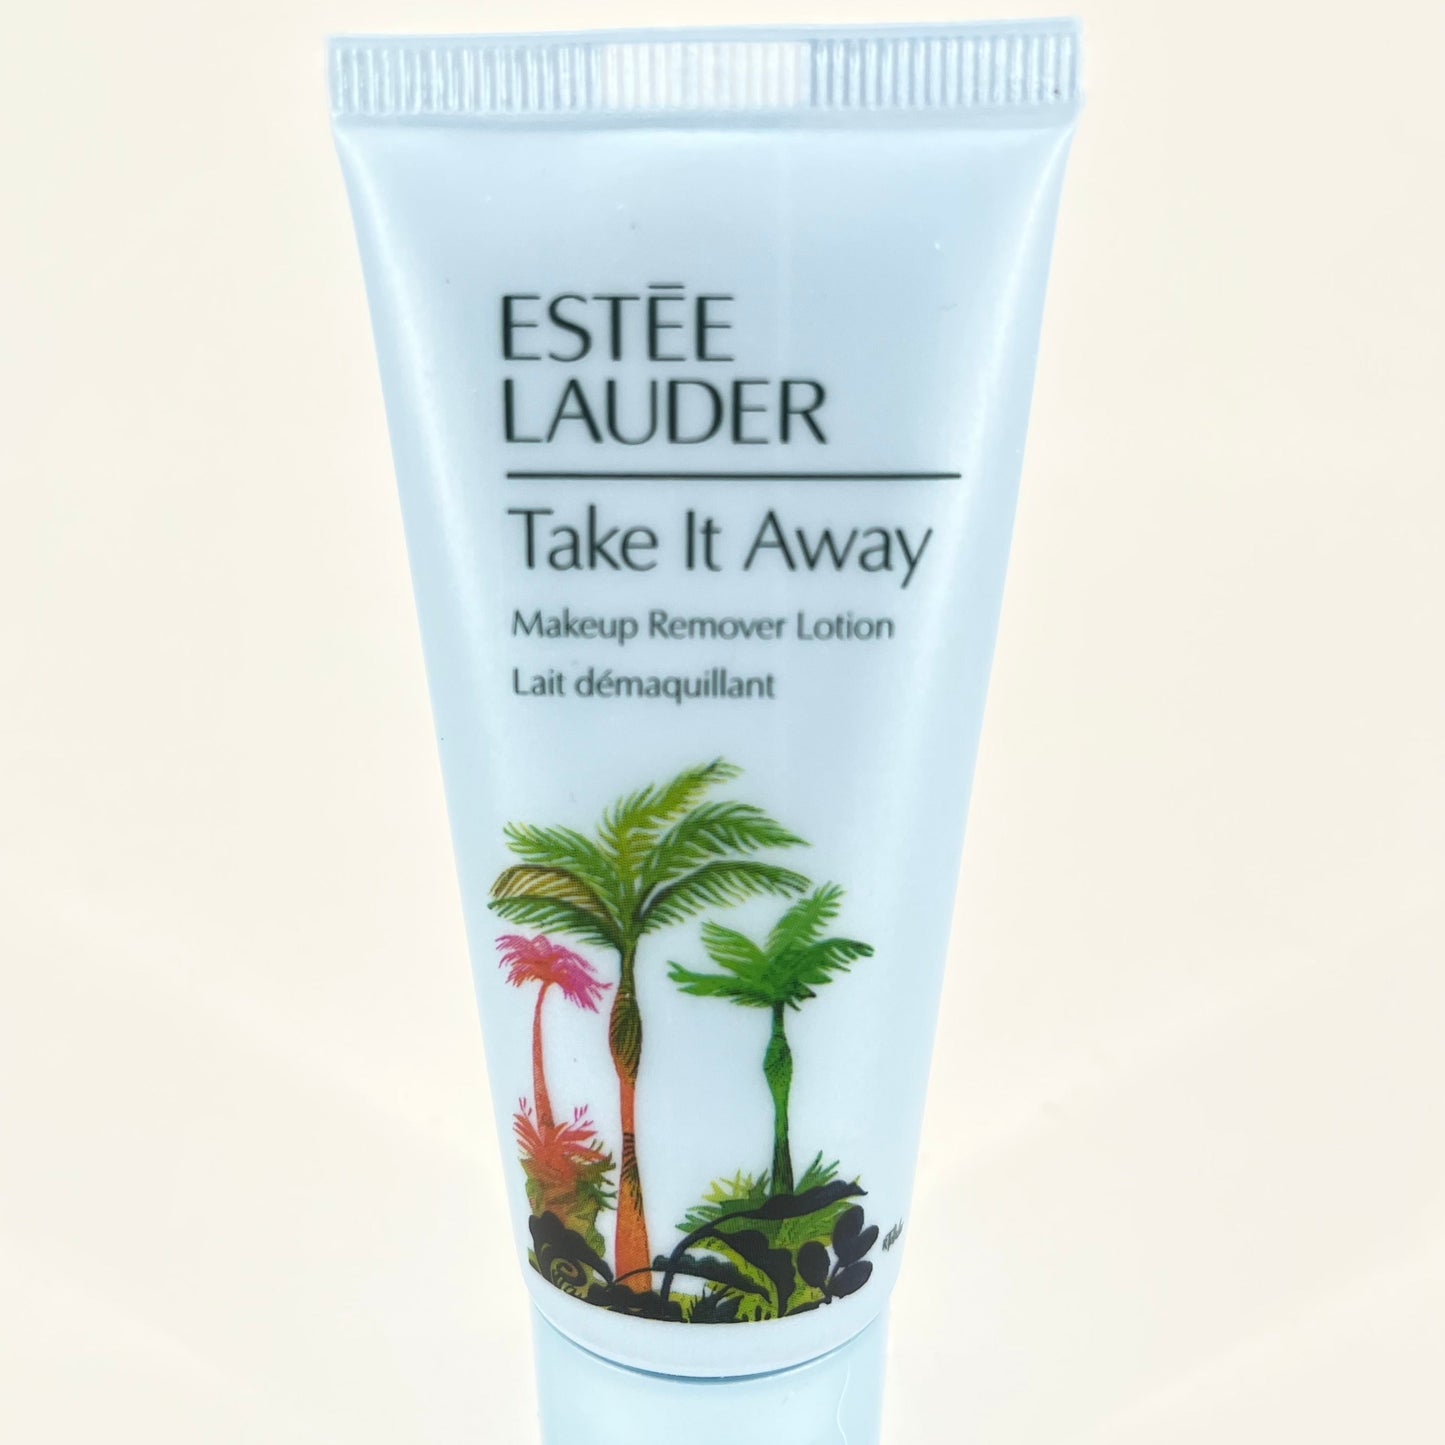 Estee Lauder Take It Away Make-Up Remover Lotion (Travel Size) 1.0 Fl. Oz. Cosmetics